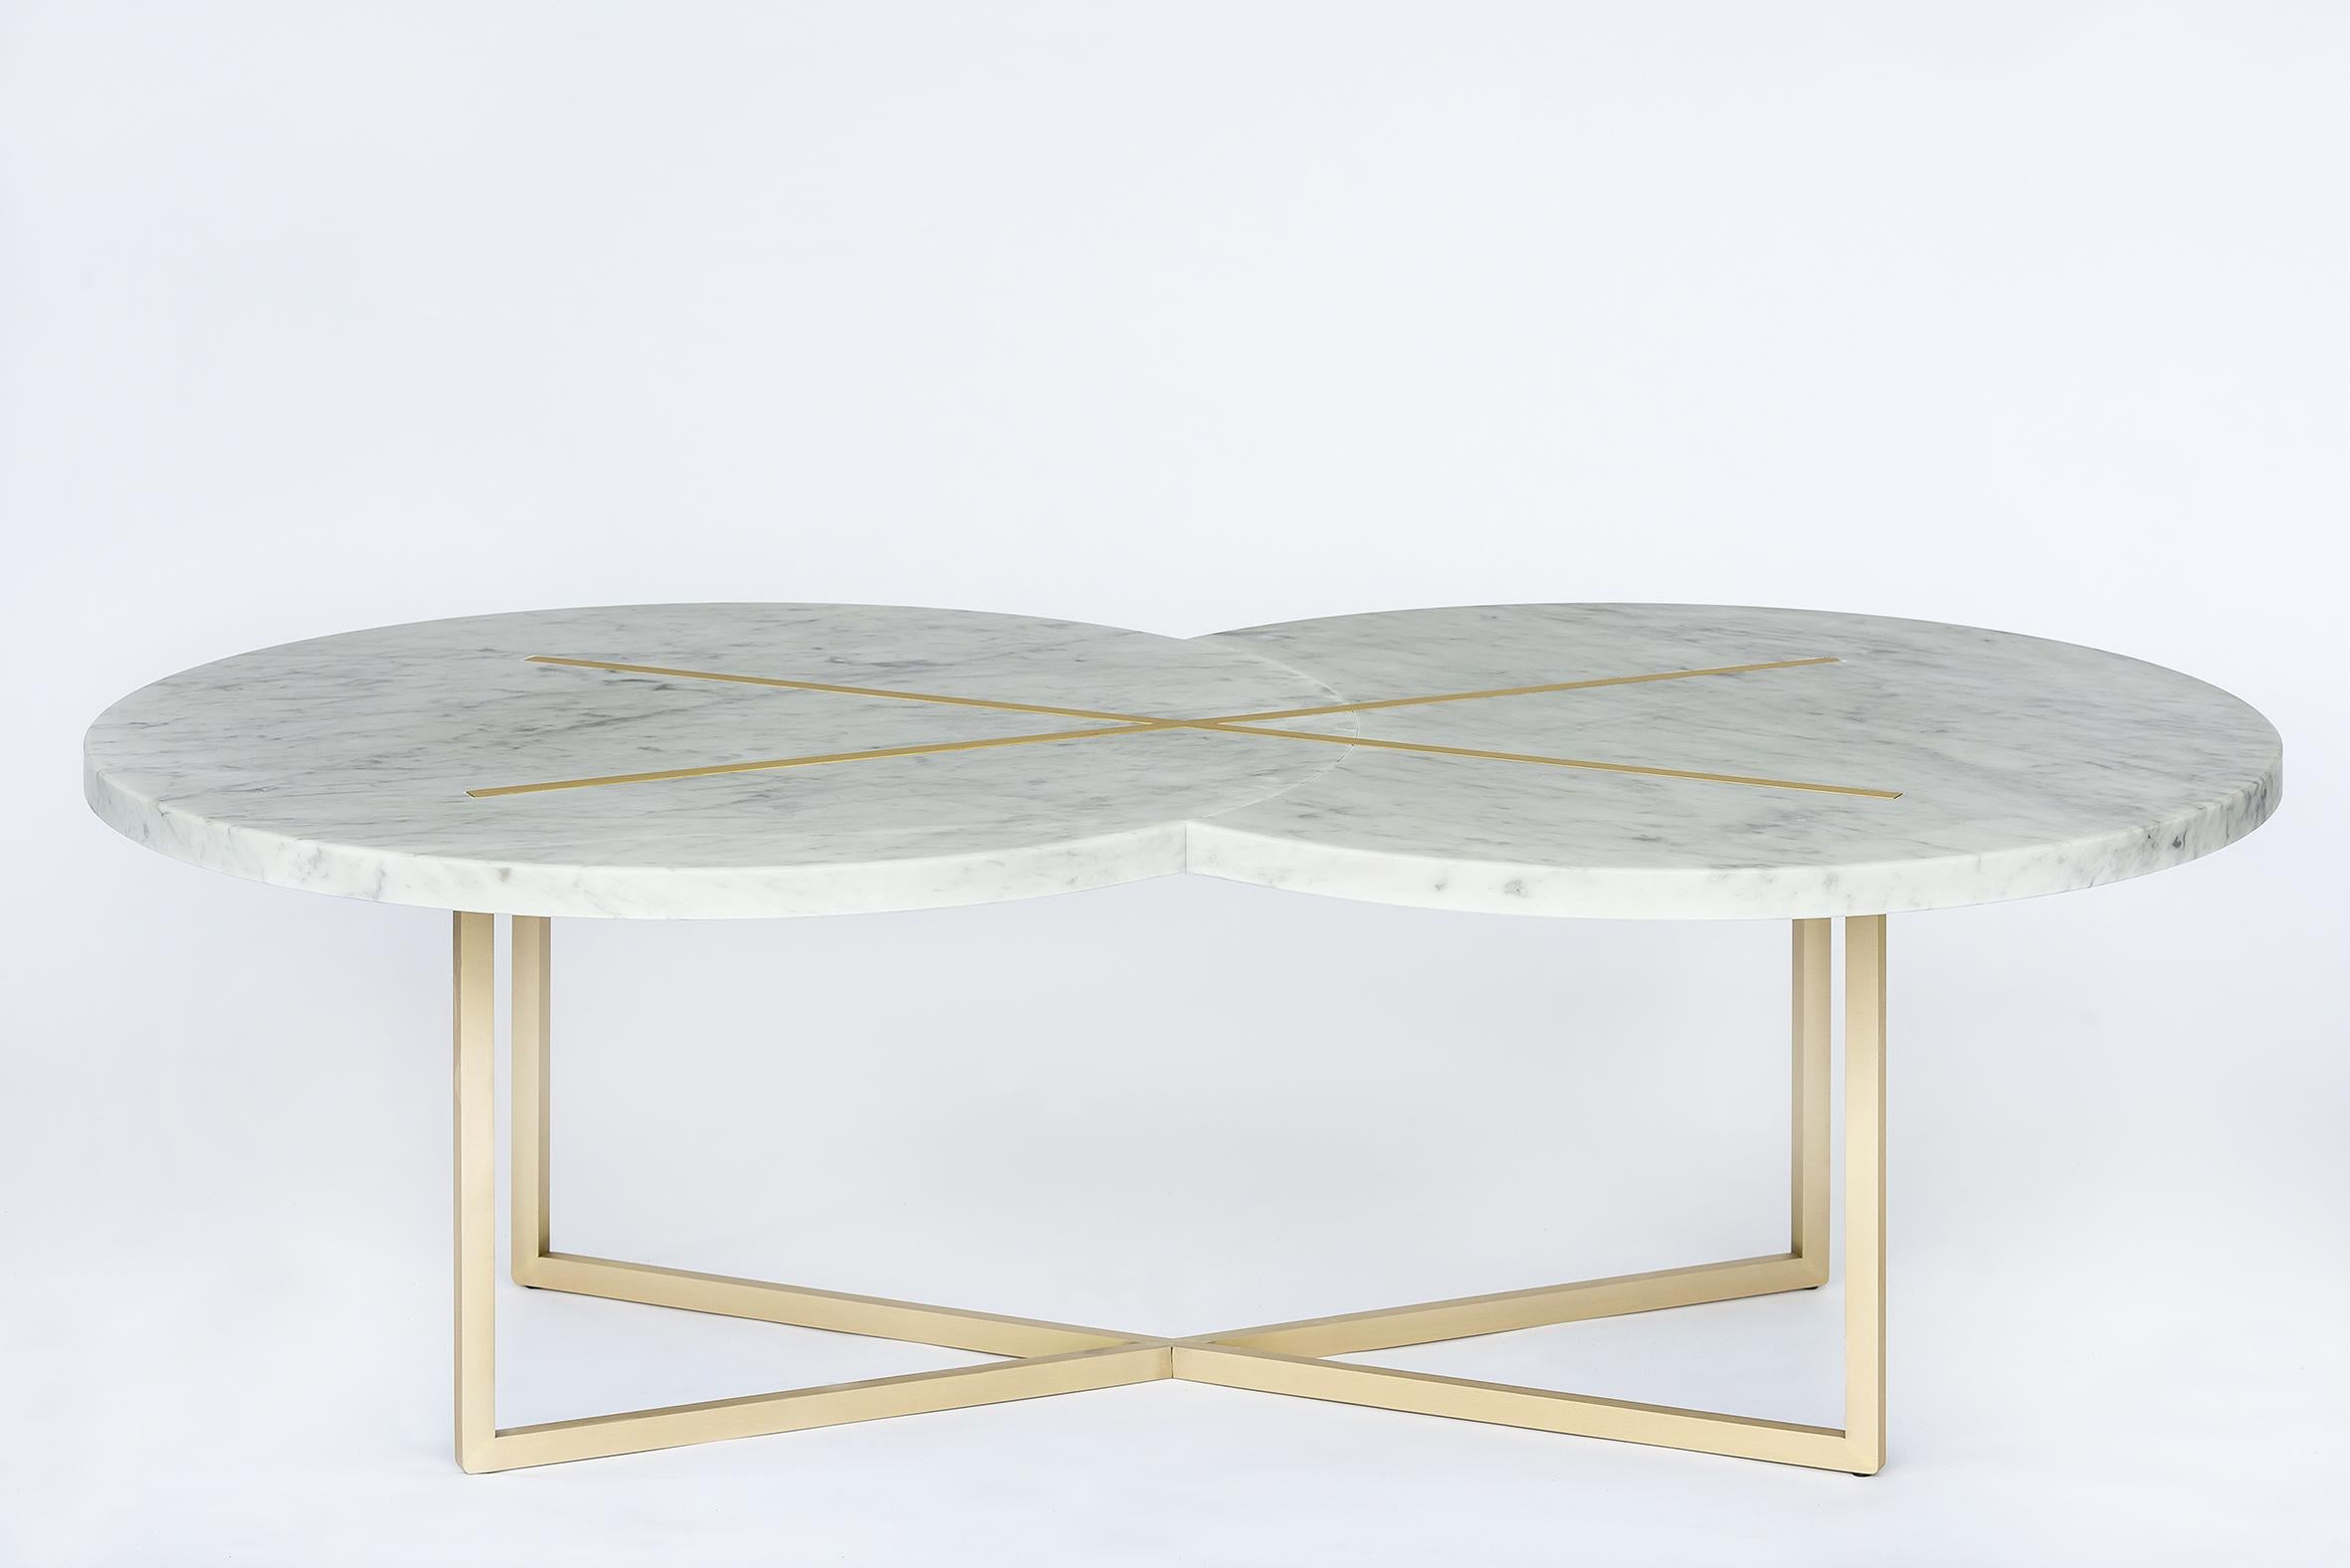 A coffee table that resembles the magical crossing between two white planets that are stroked by the blasting ray of light made with golden brass. 

The mysterious function of the universe that expresses the most stunning beauty in its very own